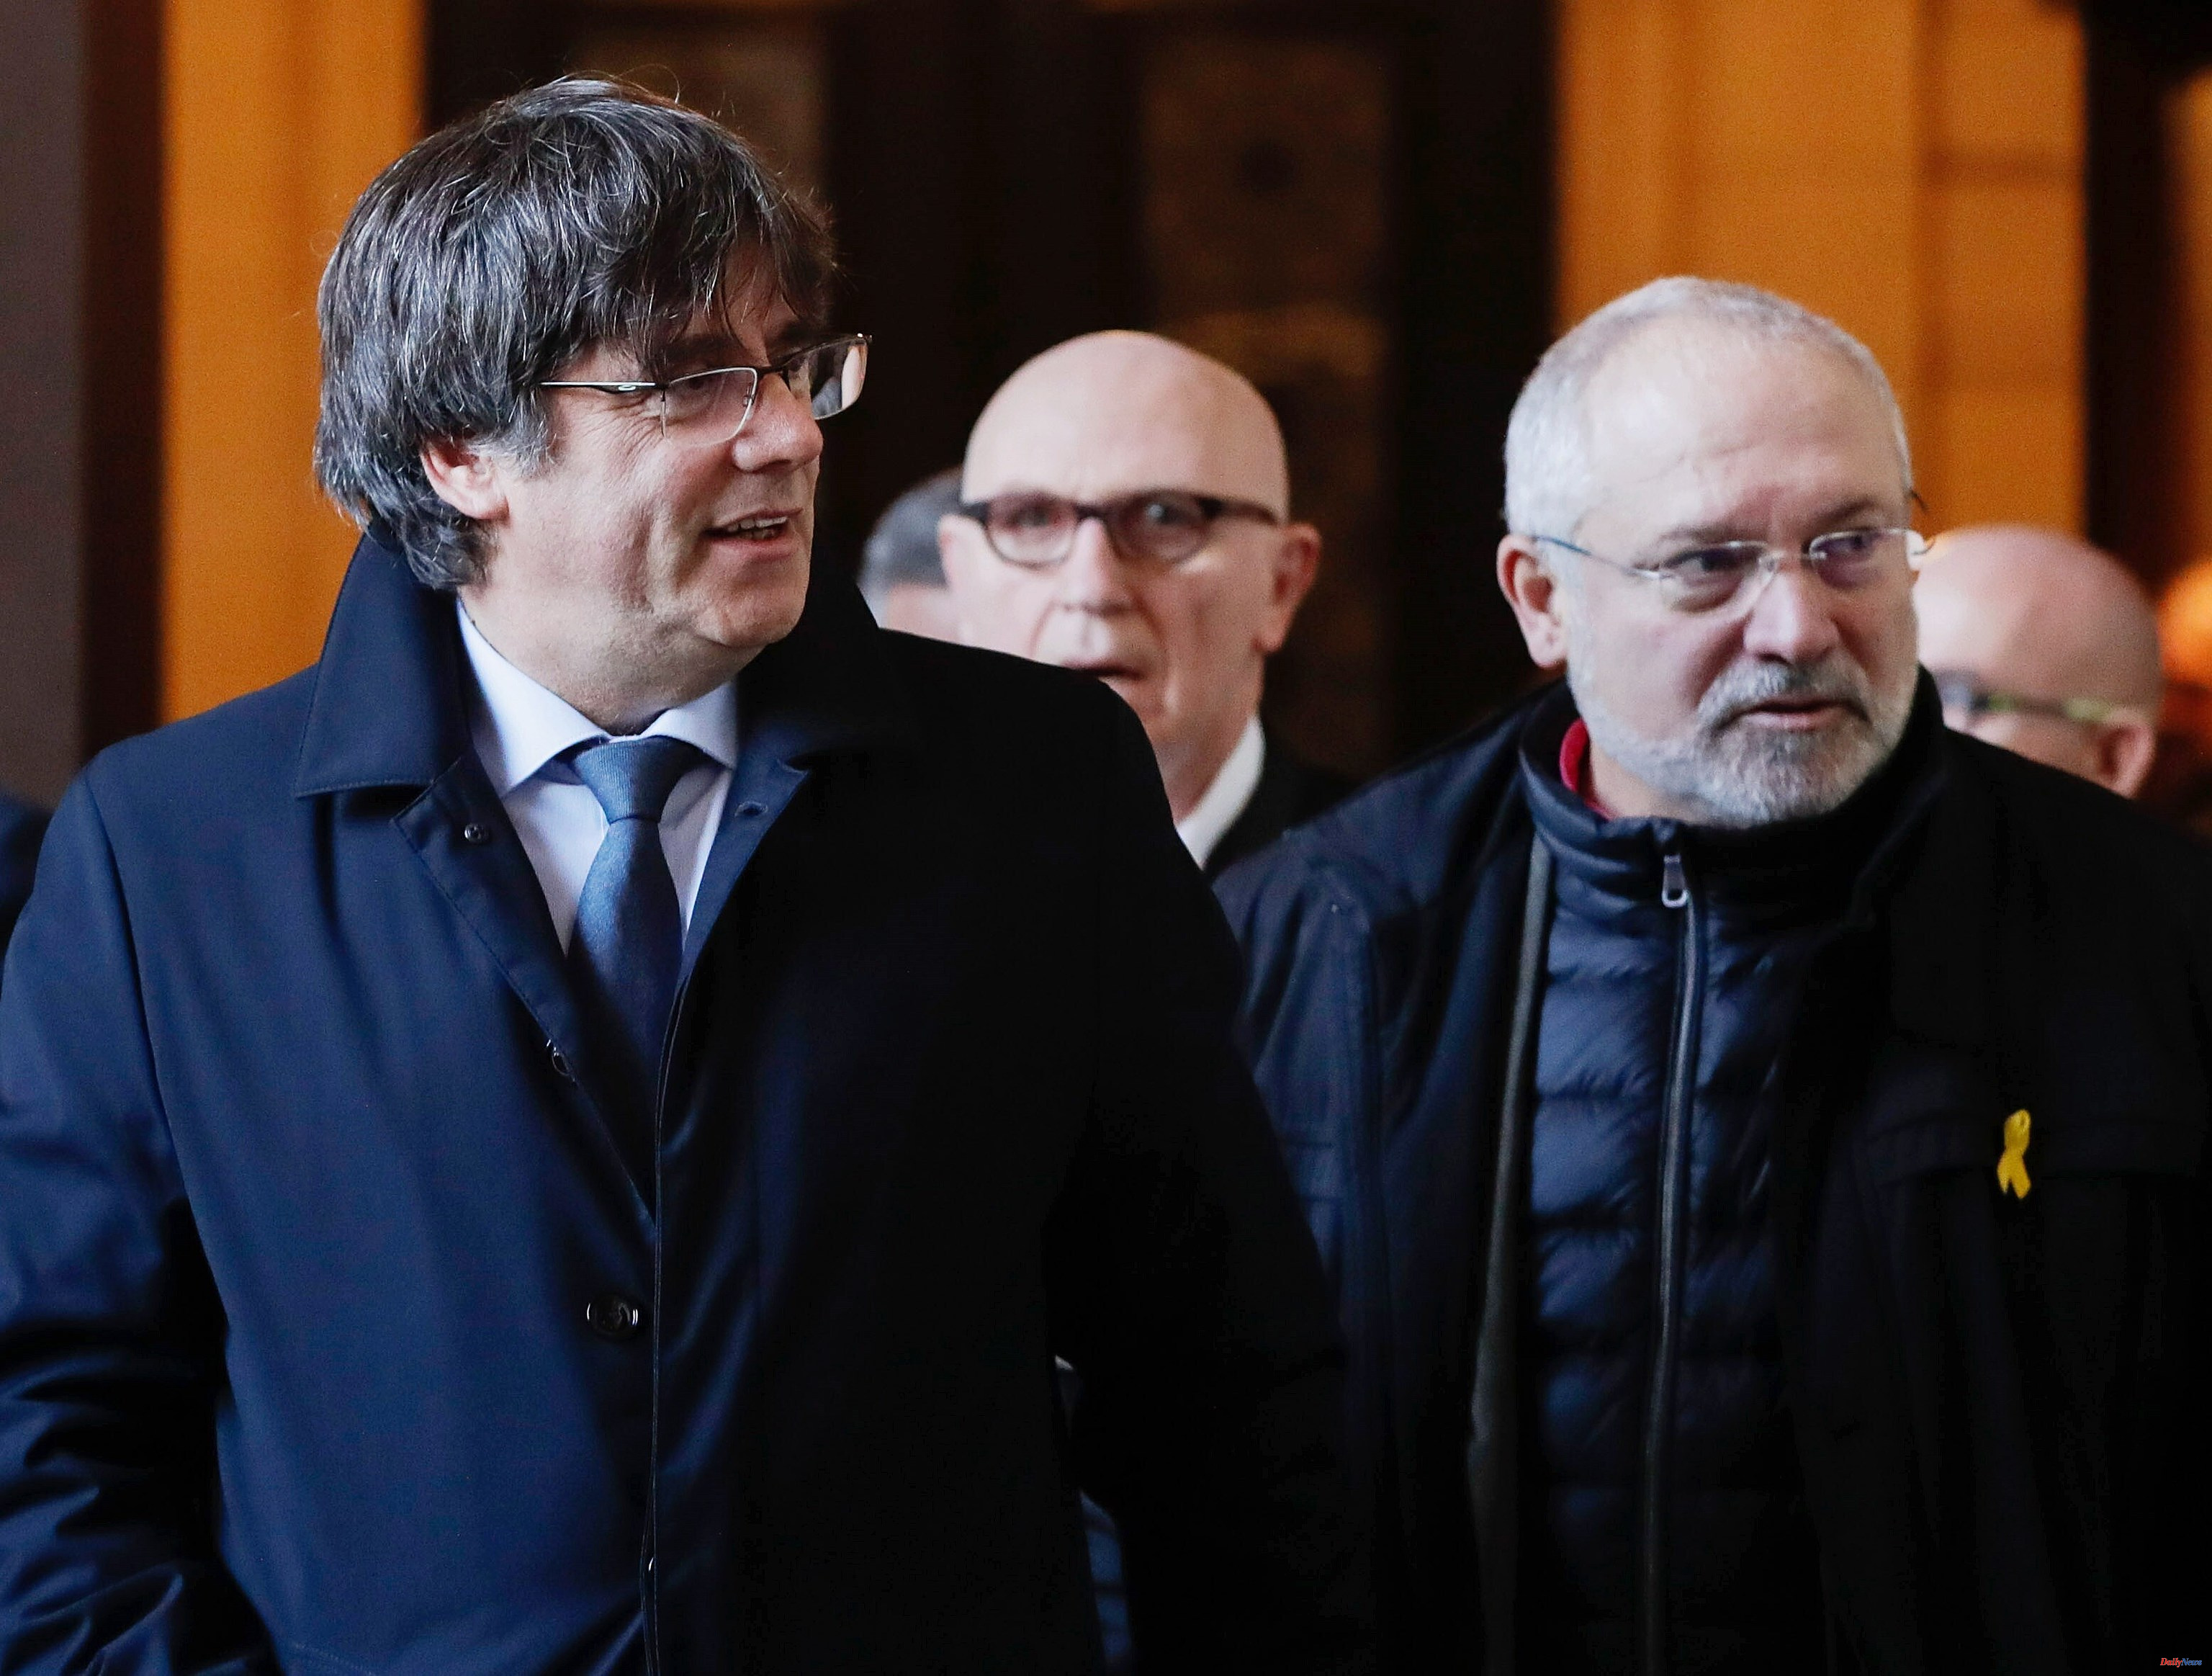 Courts The CJEU agrees with Llarena on the fugitives of 1-O and brings Puigdemont closer to Spain